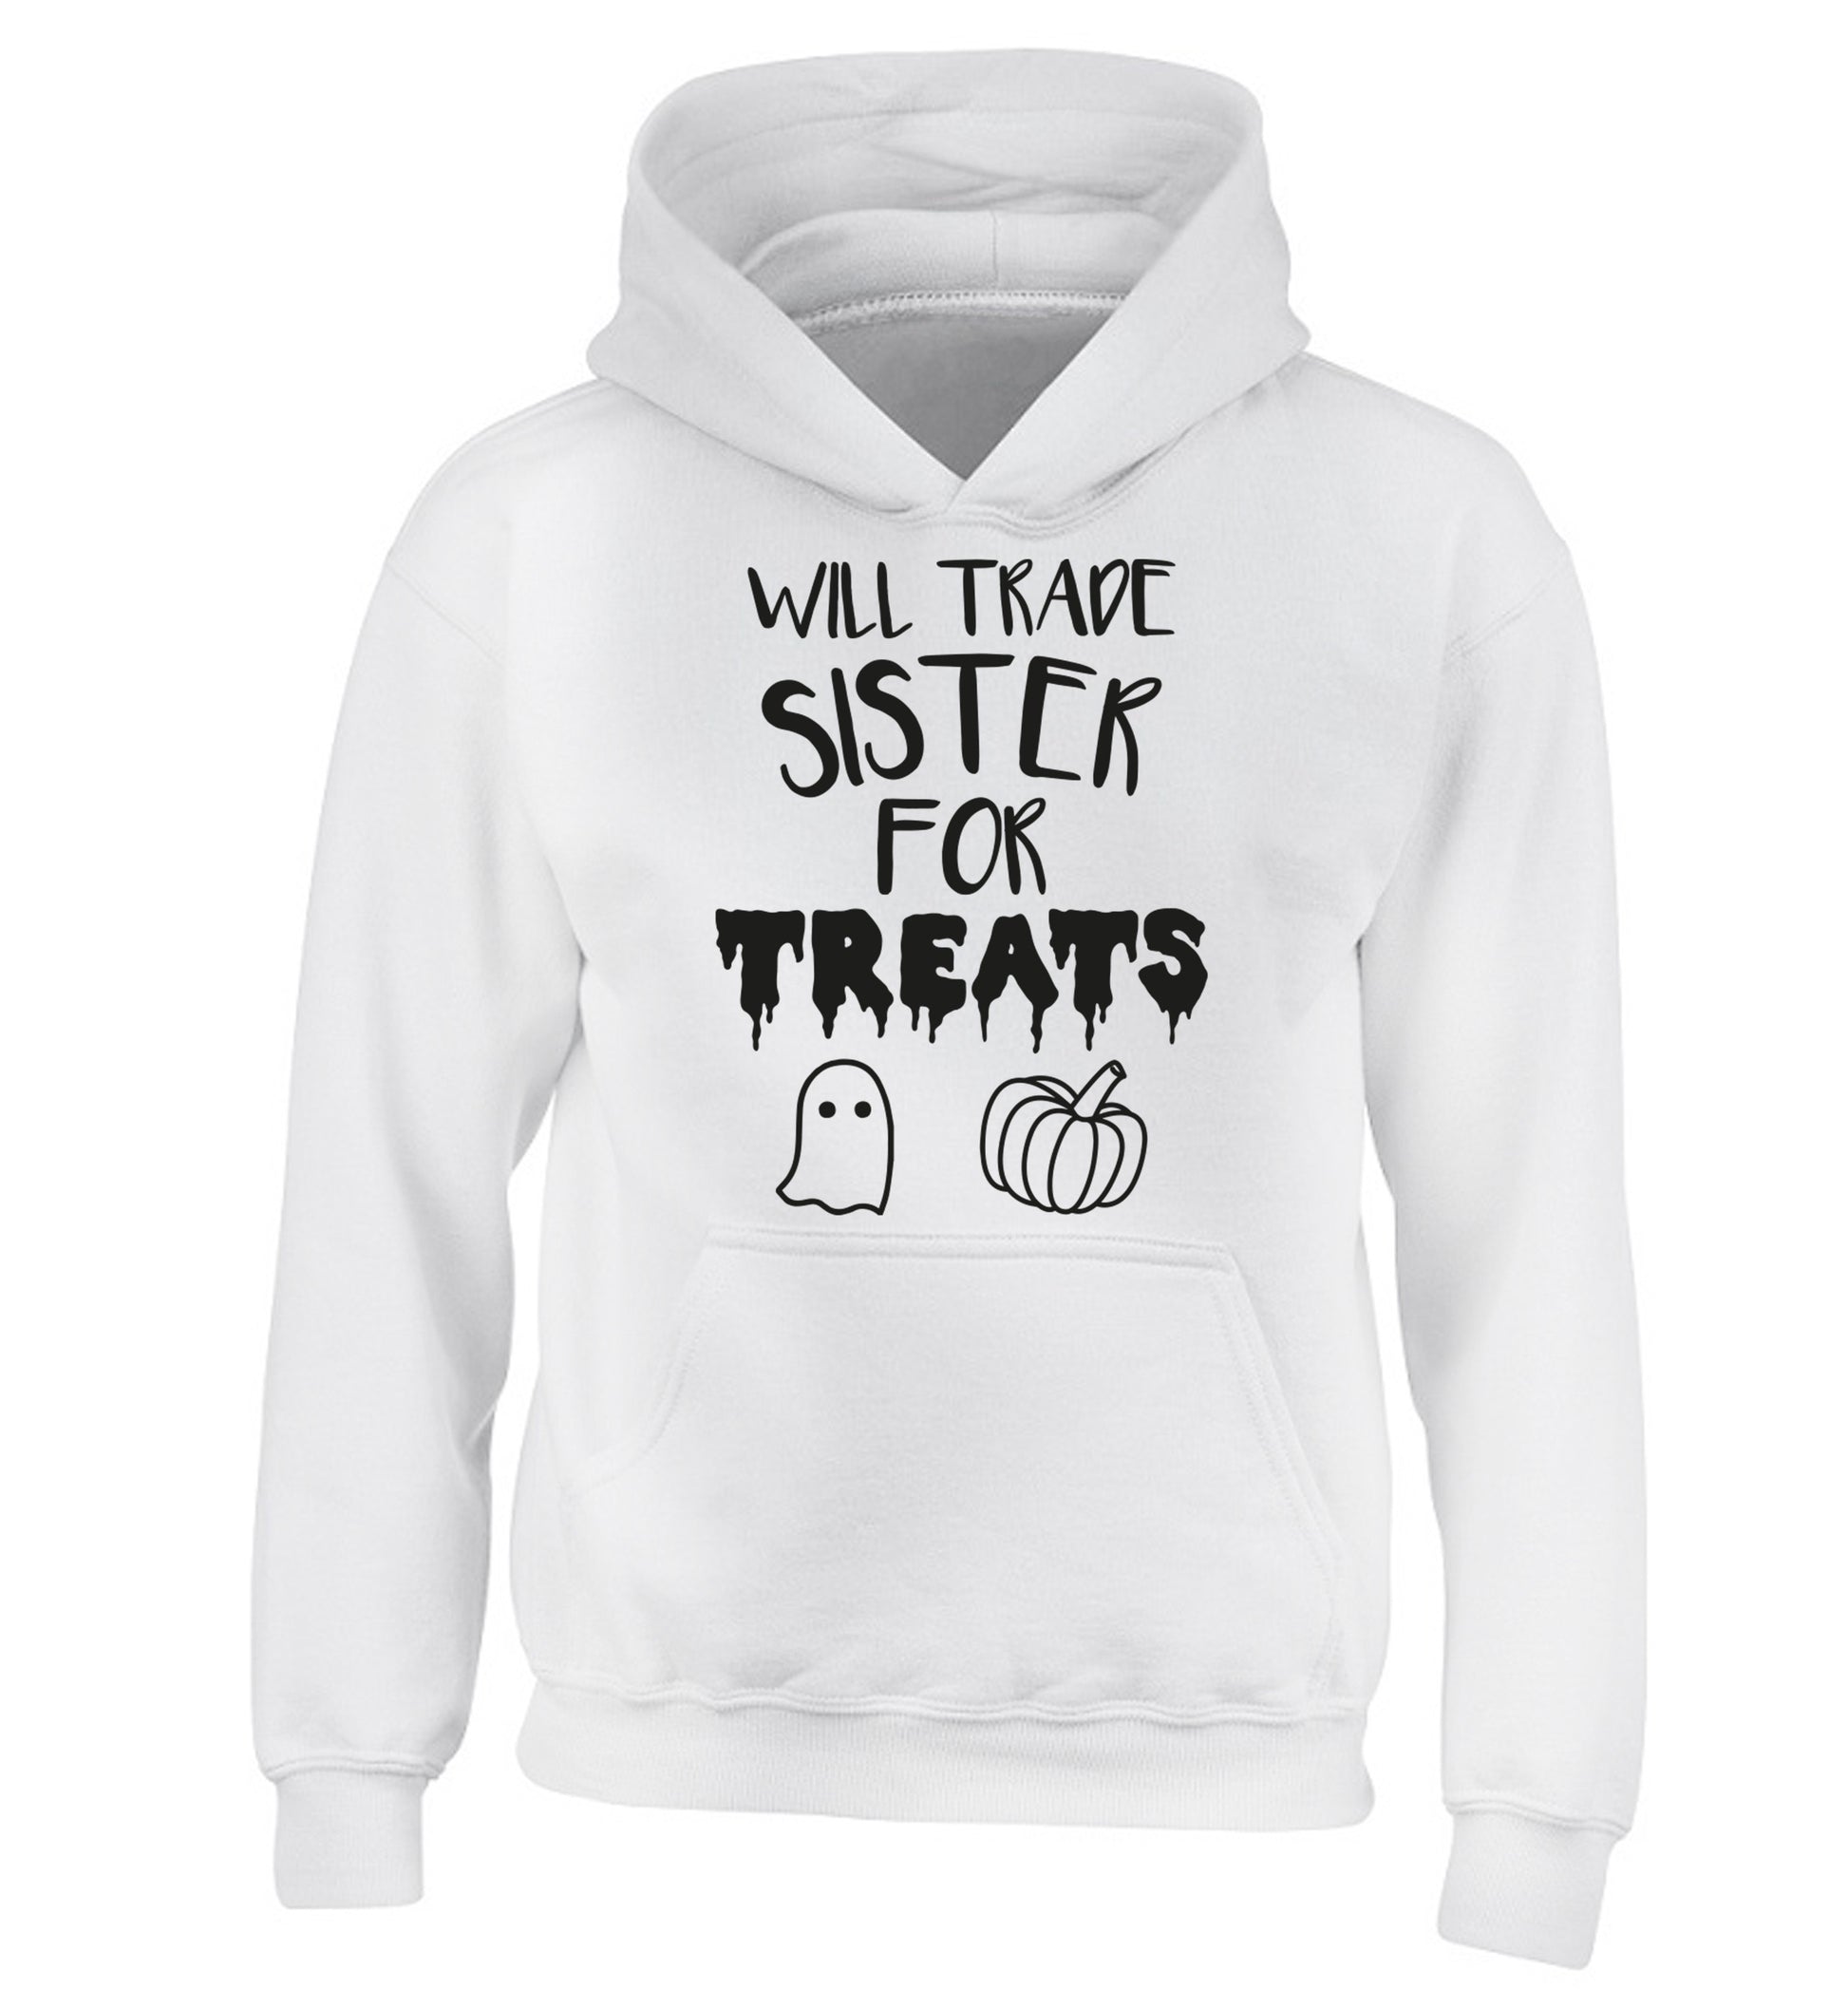 Will trade sister for treats children's white hoodie 12-14 Years